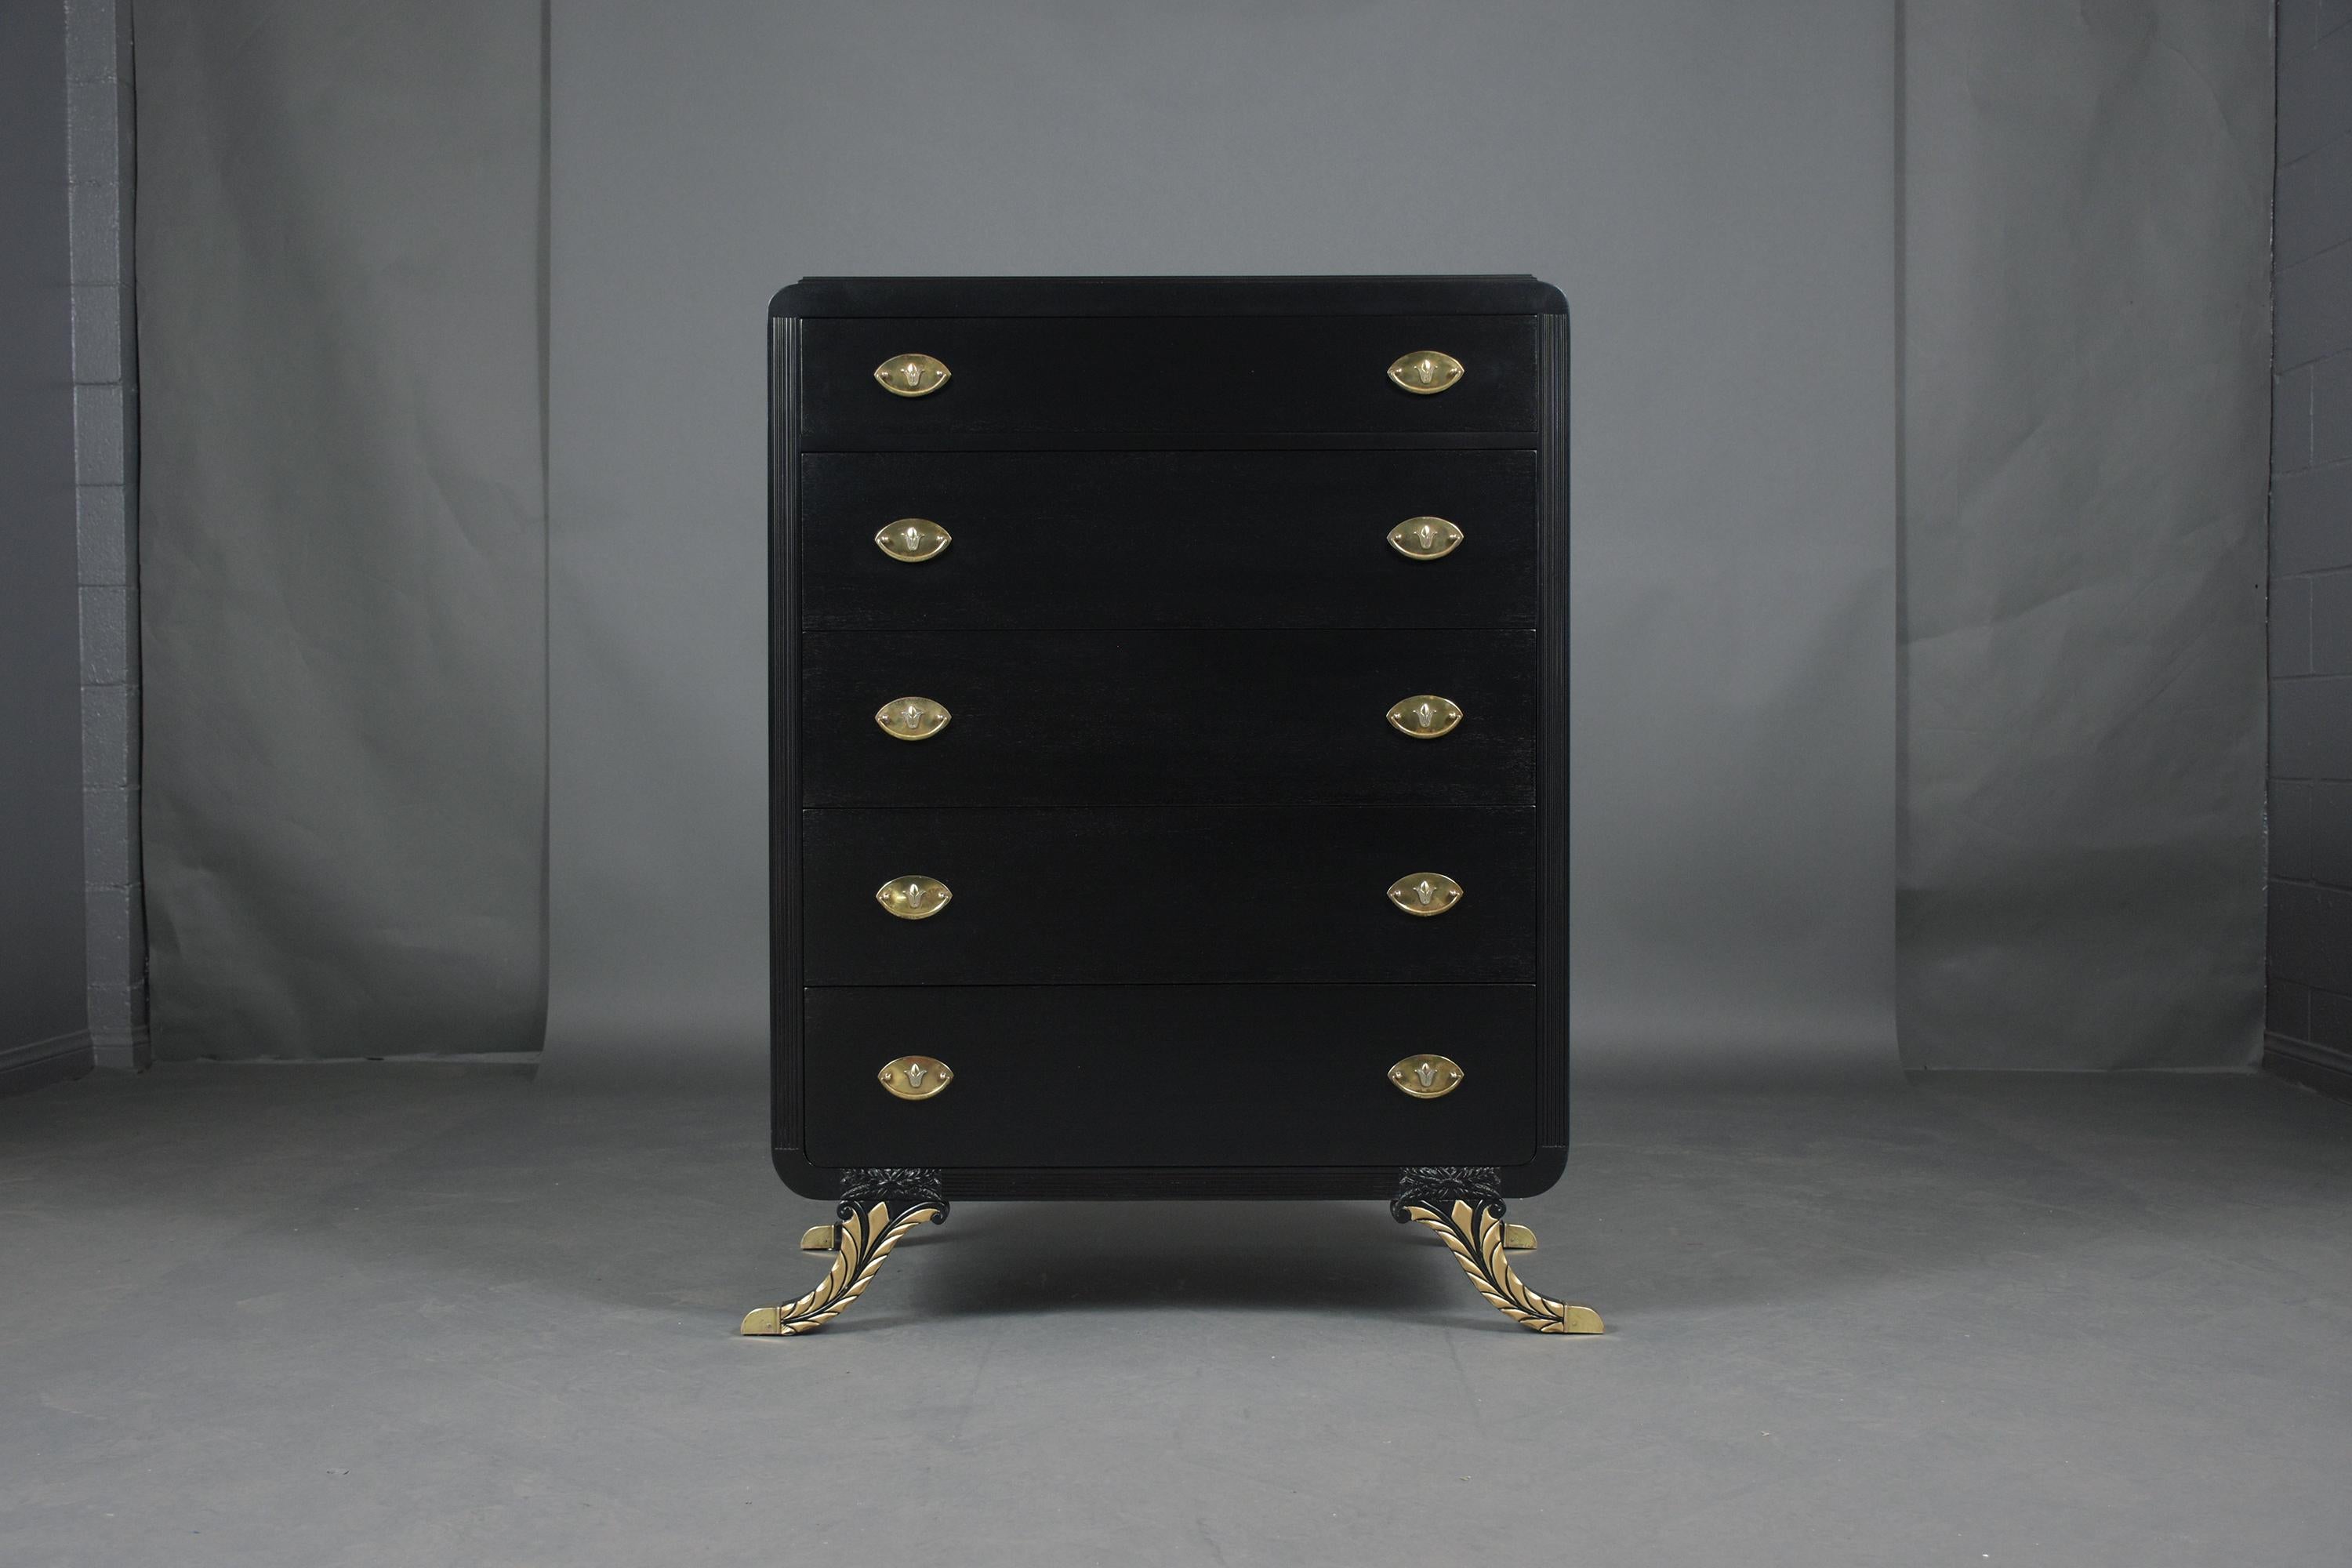 An extraordinary empire-style high dresser hand-crafted out of mahogany wood in great condition and newly restored by our craftsmen. This chest is a perfect addition to a sophisticated bedroom decor that features new elegant ebonized color with a